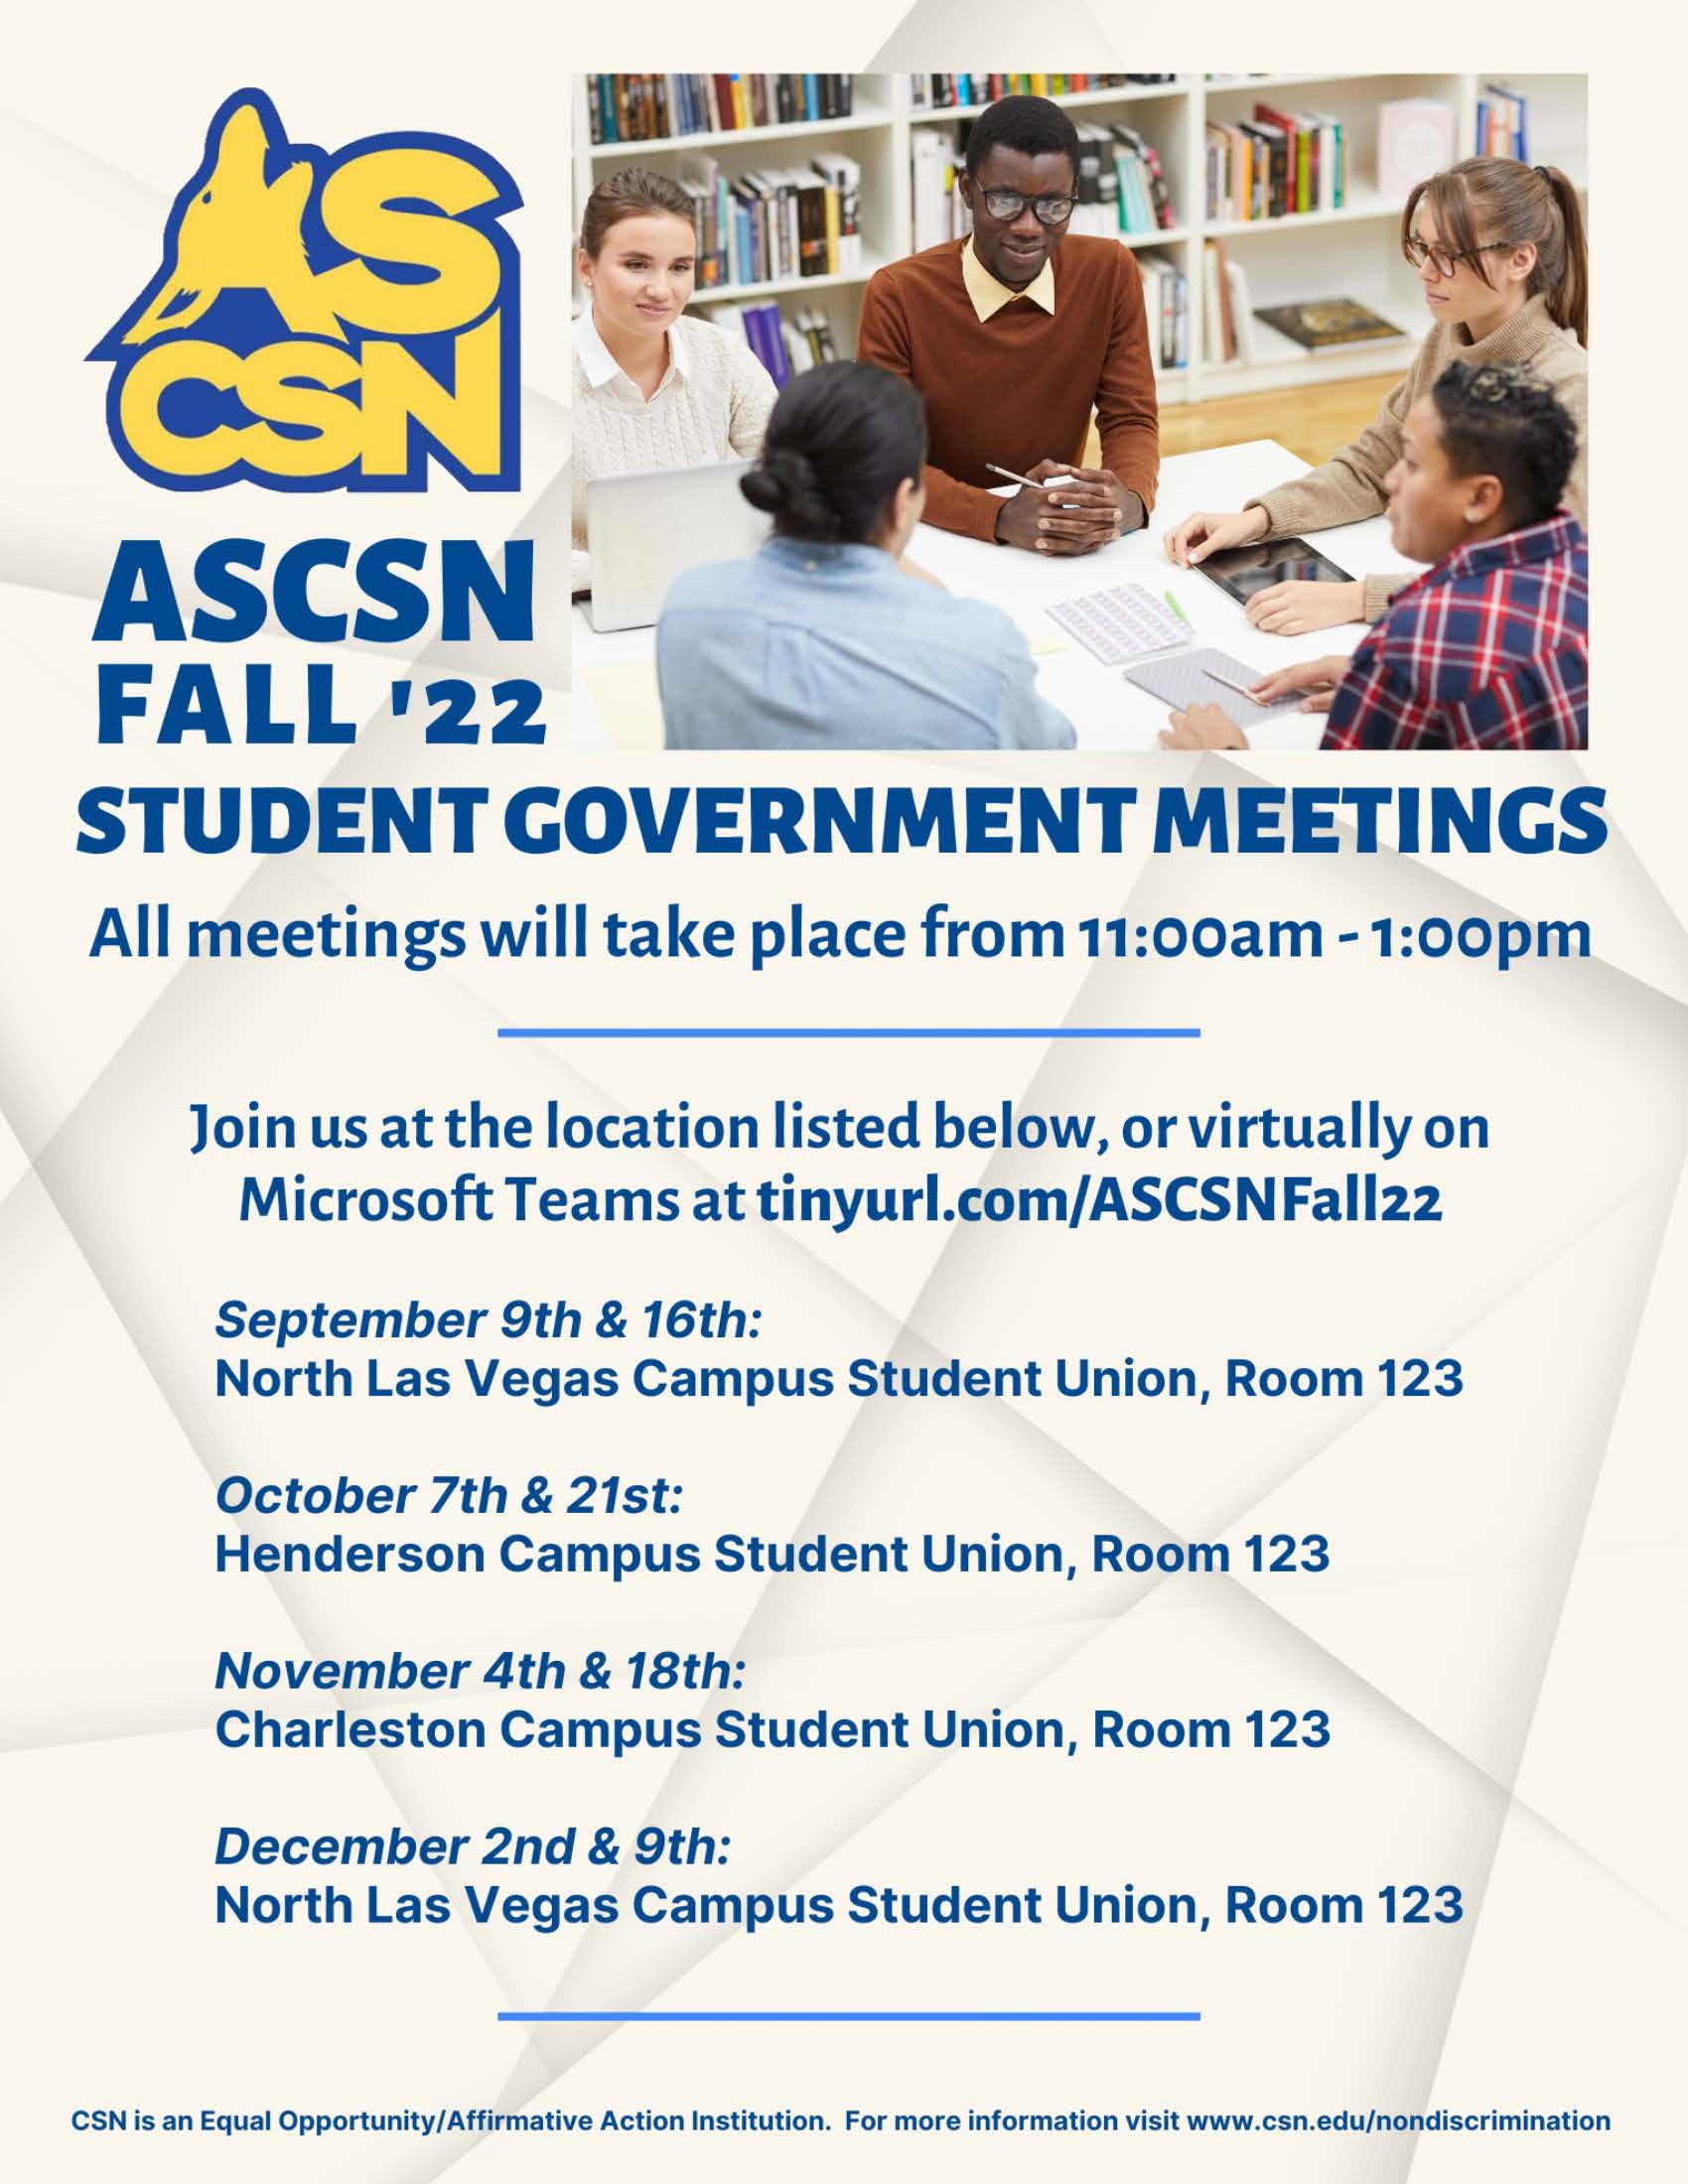 Fall 2022 Student Government meeting dates